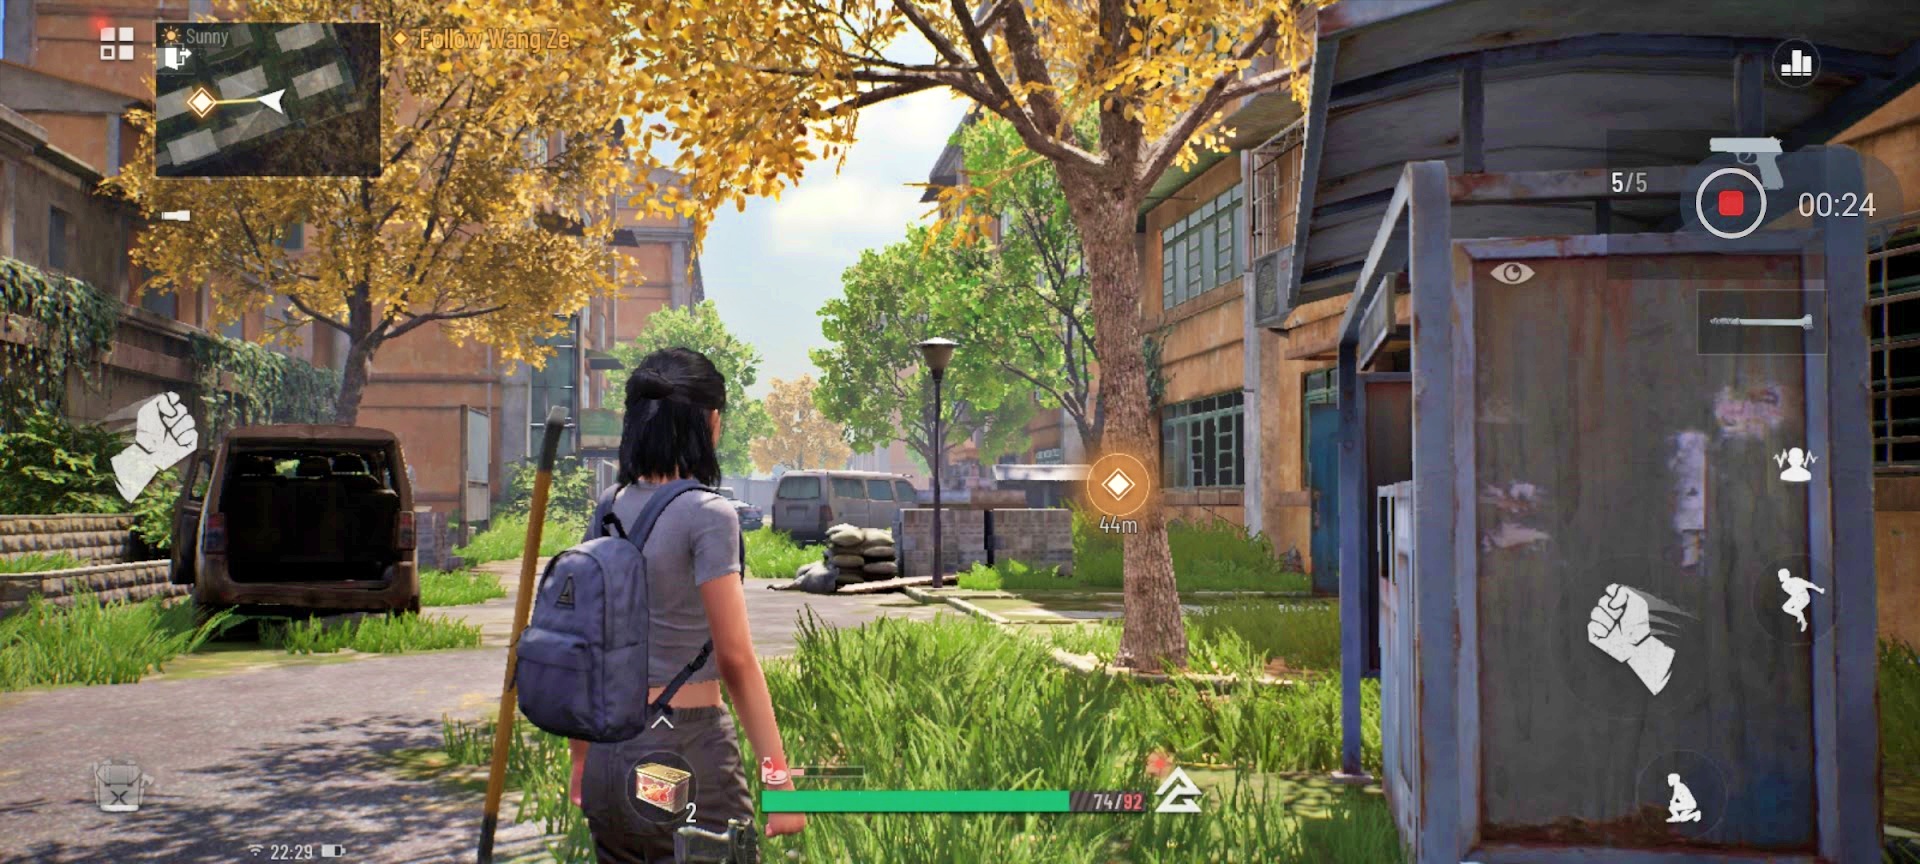 fading-city-gameplay Fading City: game apelidado de "The Last of Us Mobile" surge na Google Play